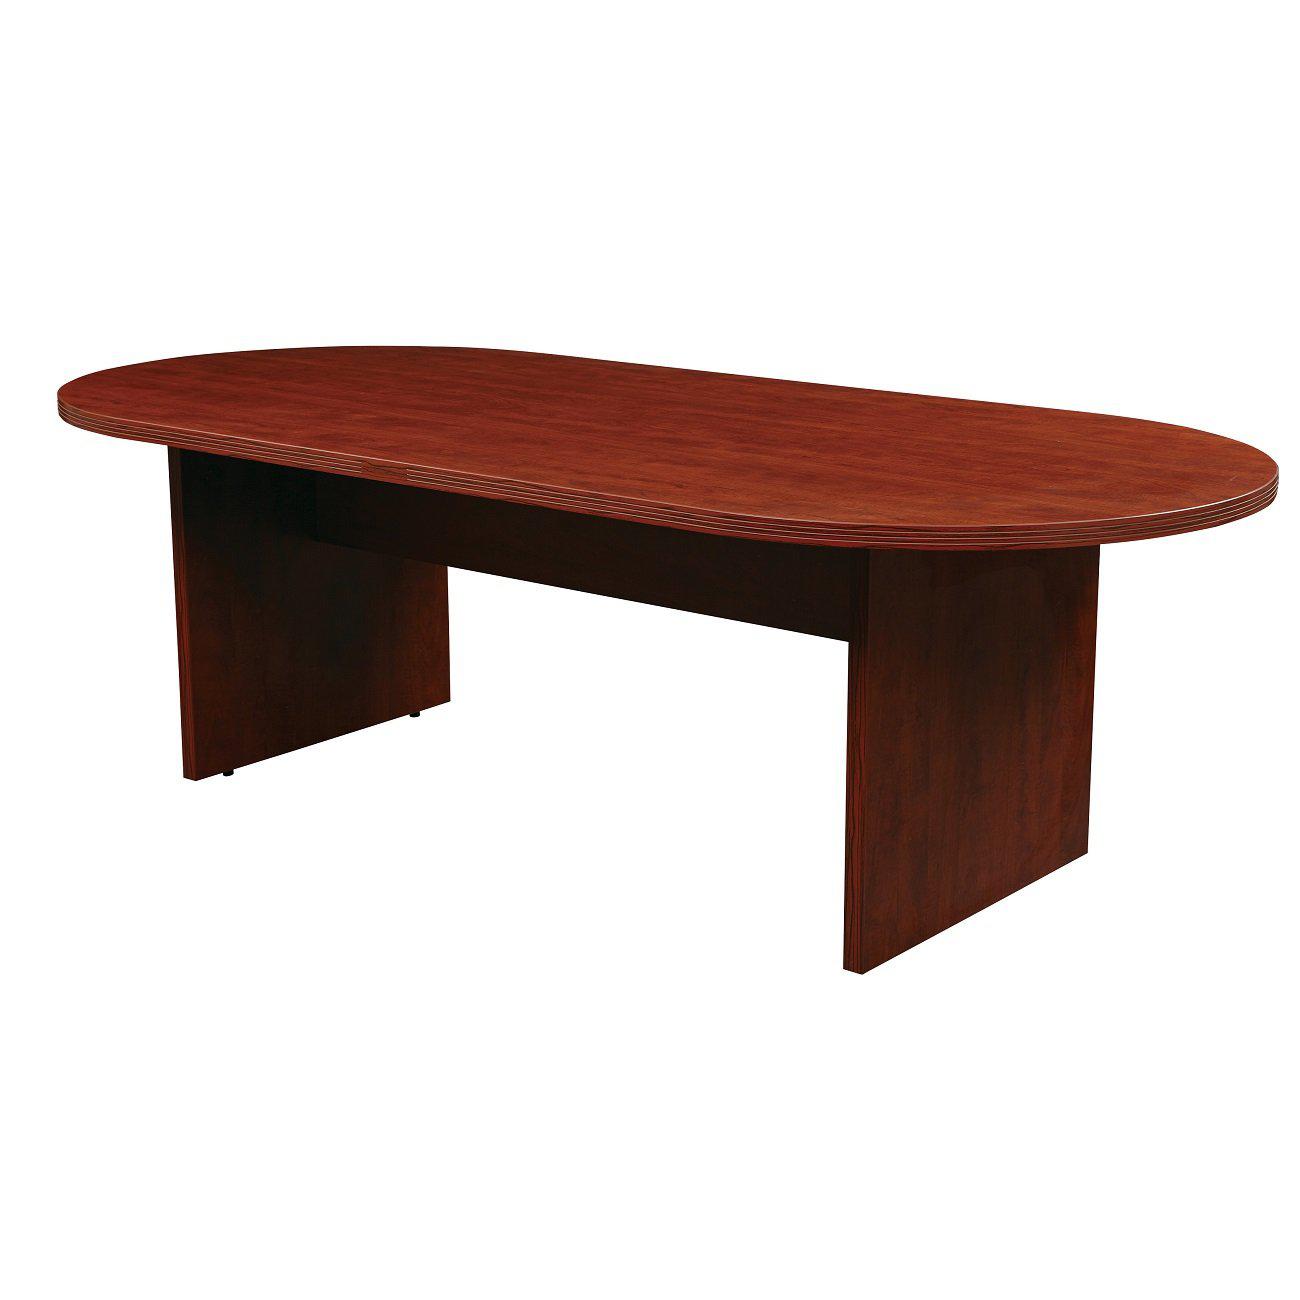 Napa Racetrack Conference Table, 71" x 35" x 29" H